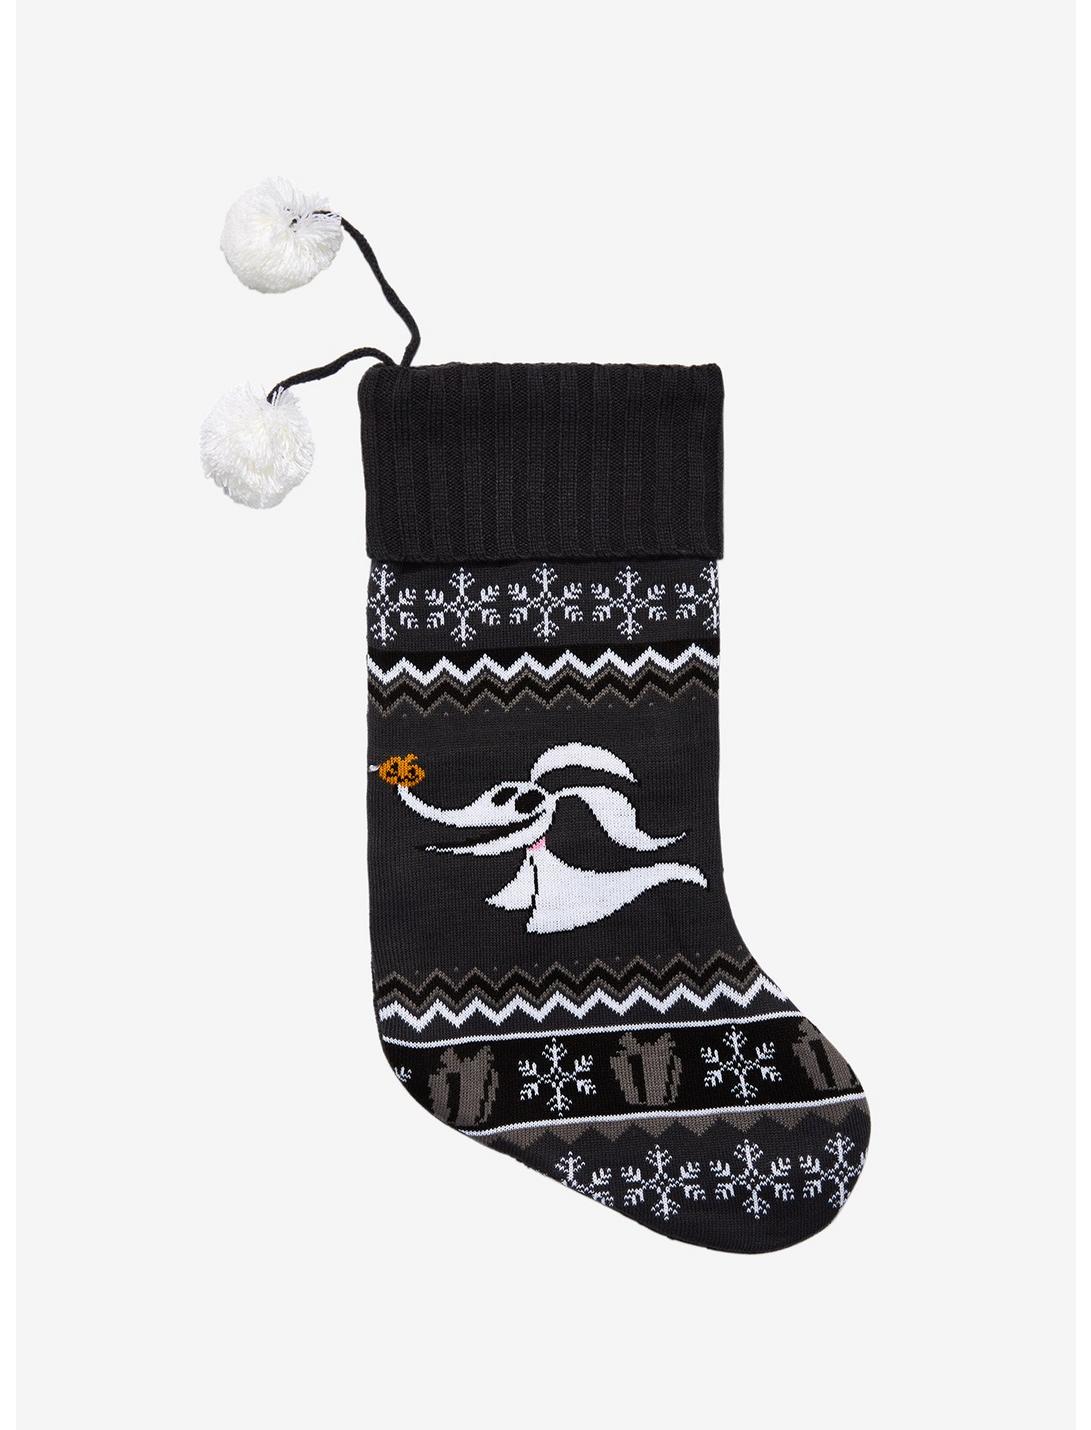 The Nightmare Before Christmas Zero Knit Stocking Hot Topic Exclusive, , hi-res